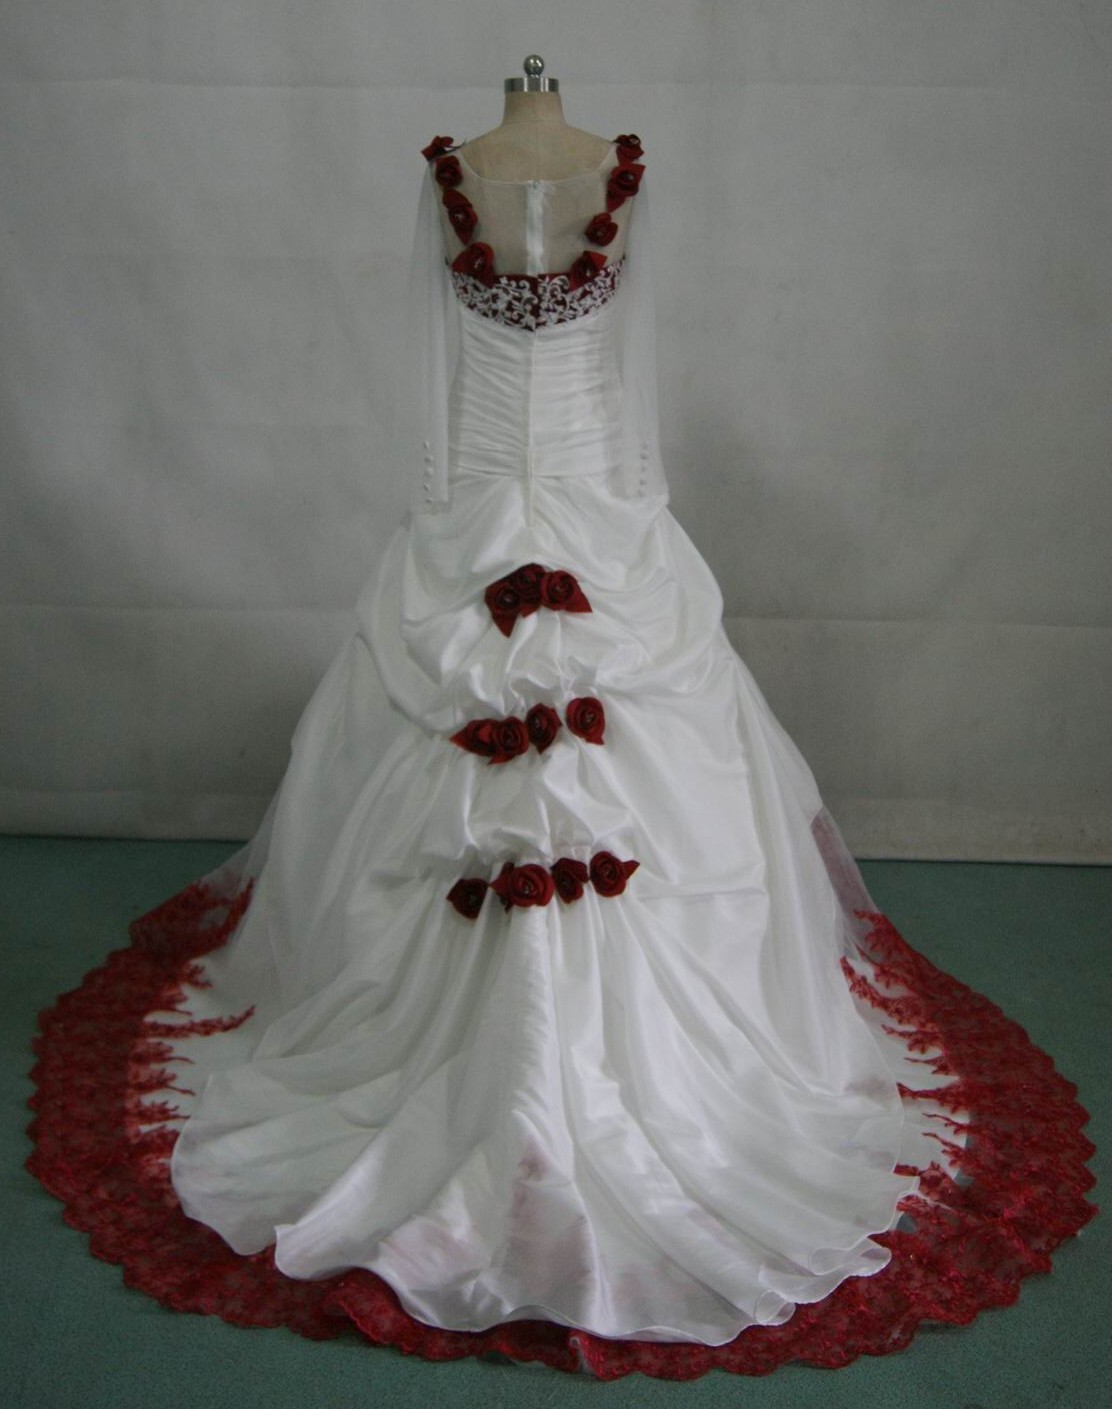 white wedding gown with red roses on the dress